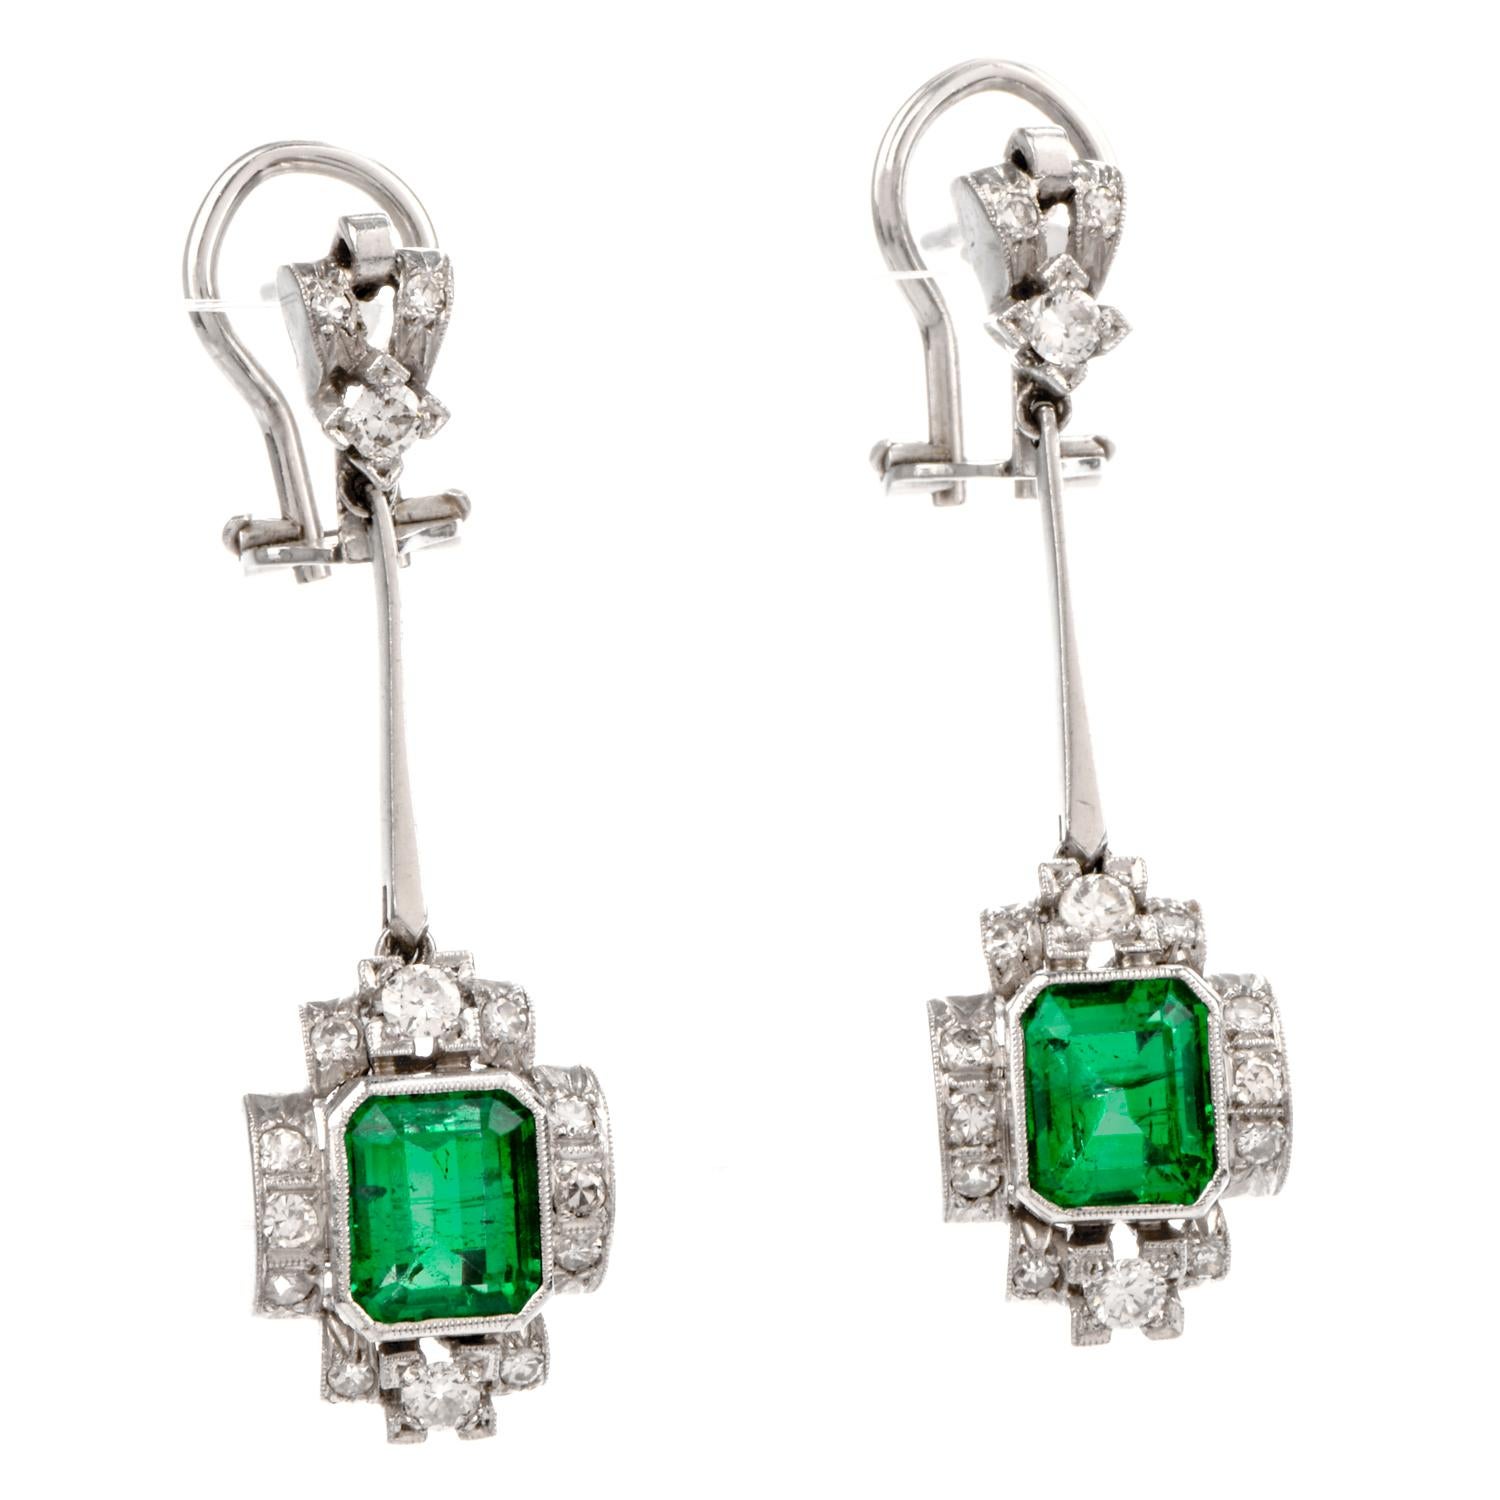 These stunning emerald and diamond dangle drop earrings are crafted in solid 18-karat white gold, weighing 11.0 grams and measuring 40mm long x 12mm wide. The geometric drop exposes a pair of bezel-set, emerald-cut genuine High quality GIA lab